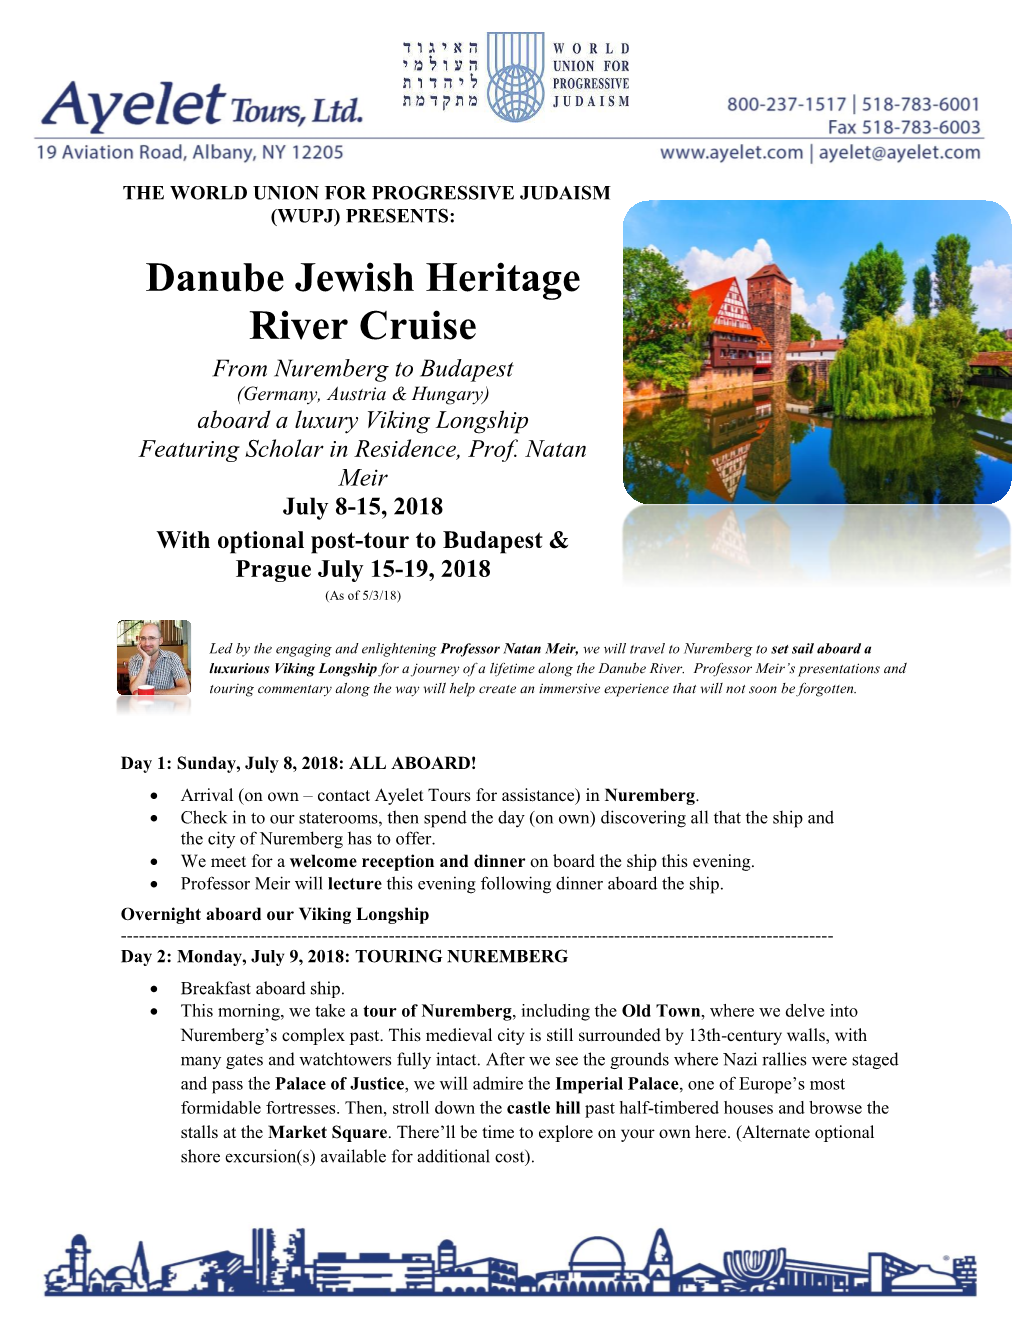 Danube Jewish Heritage River Cruise from Nuremberg to Budapest (Germany, Austria & Hungary) Aboard a Luxury Viking Longship Featuring Scholar in Residence, Prof